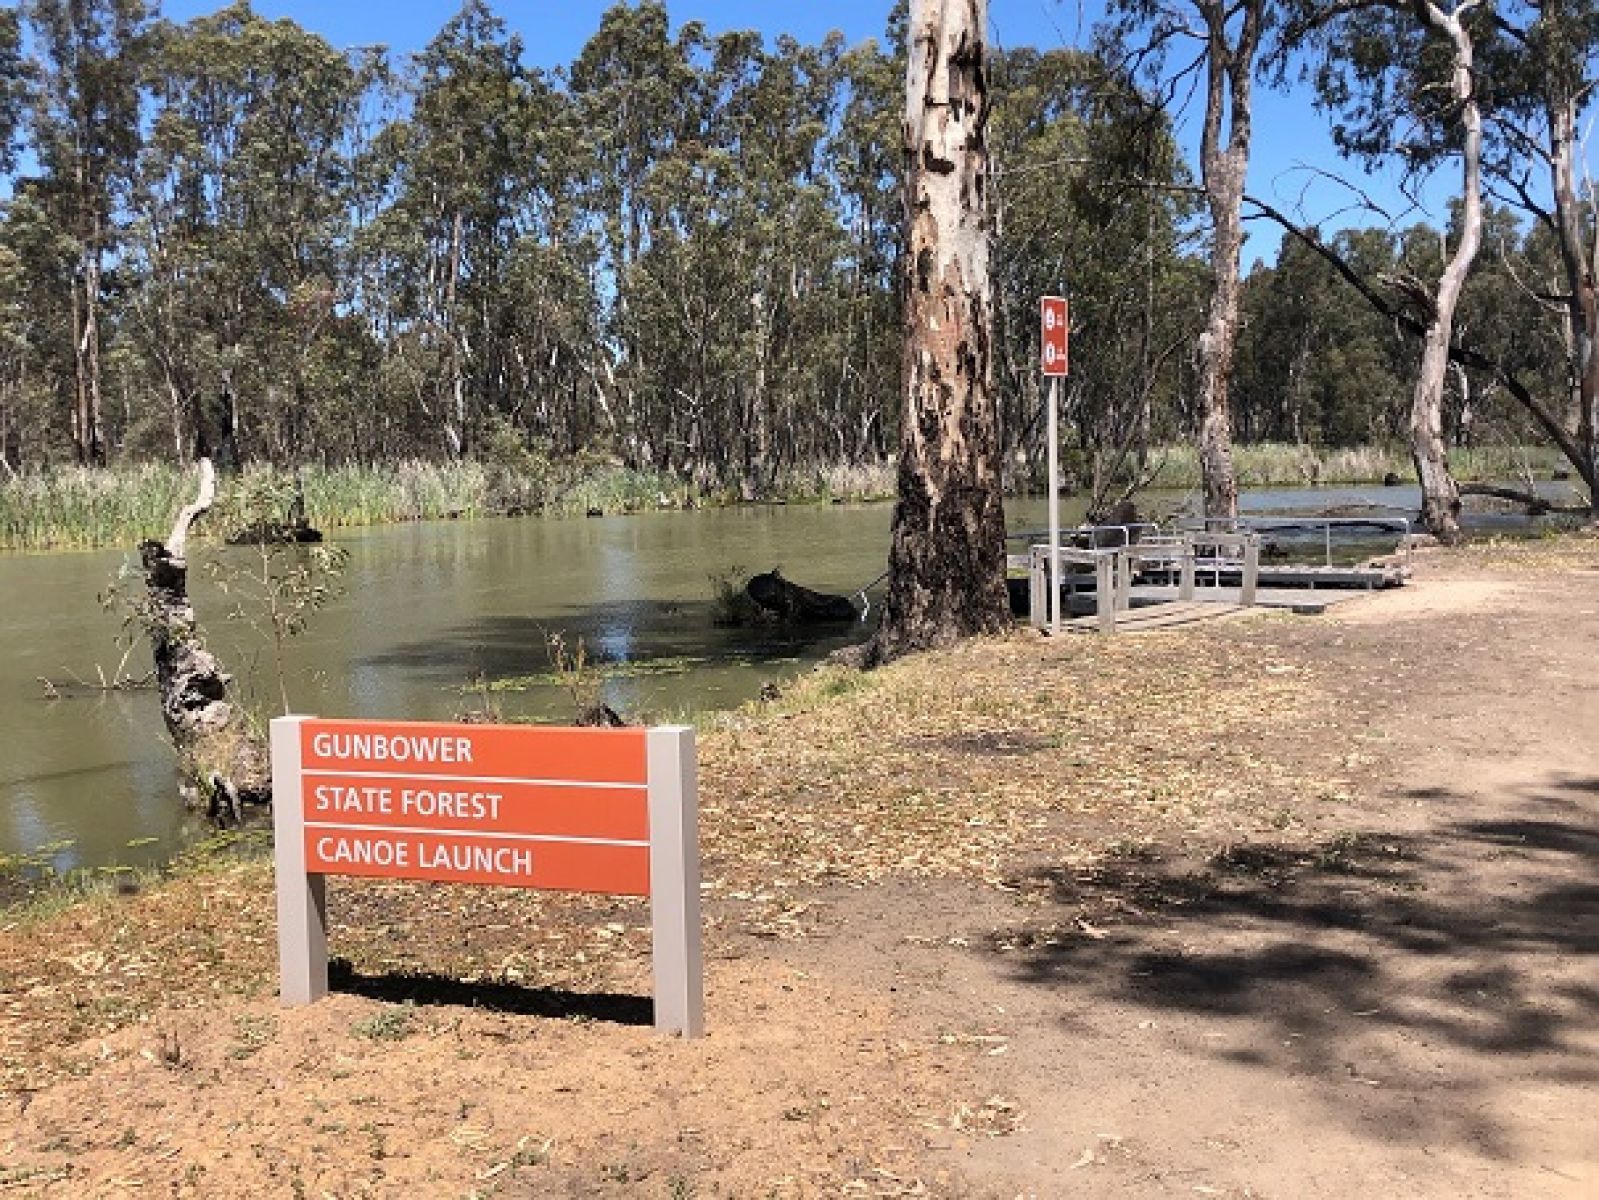 A sign next to Gunbower Creek that reads Gunbower State Forest Canoe Launcher